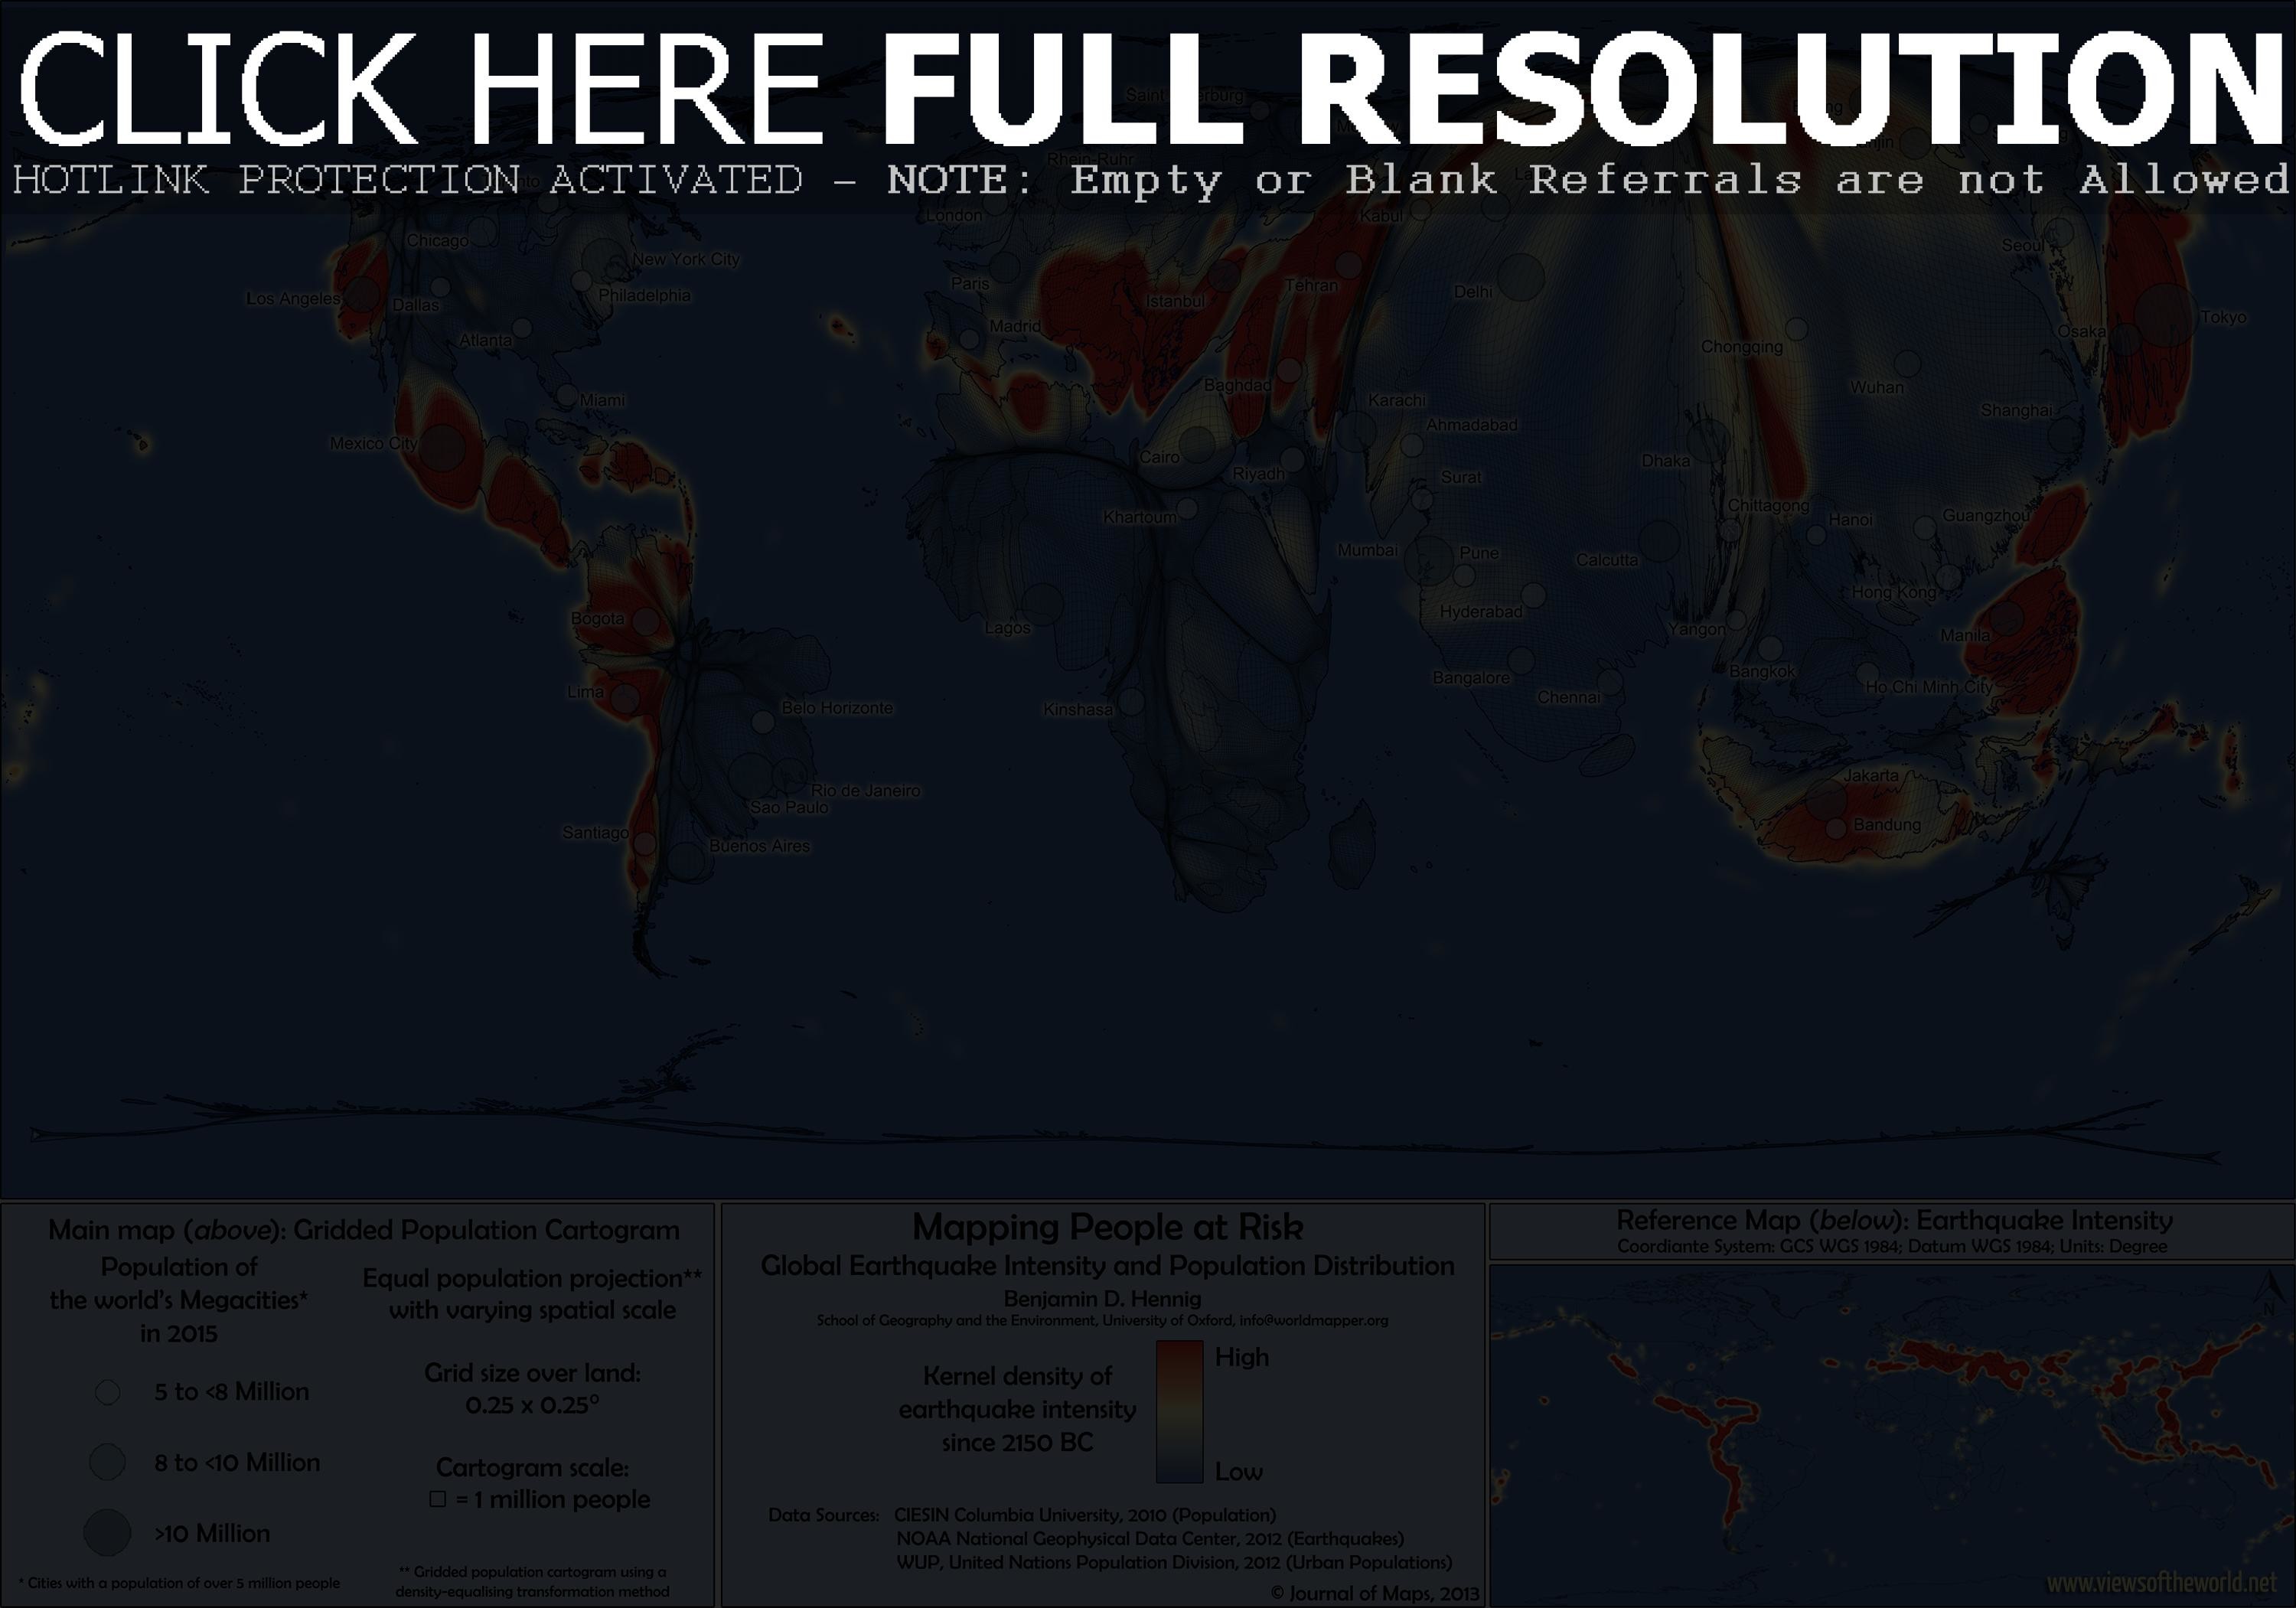 3000x2101 Earthquake Risk Zones A People S Perspective Views Of The World And Map